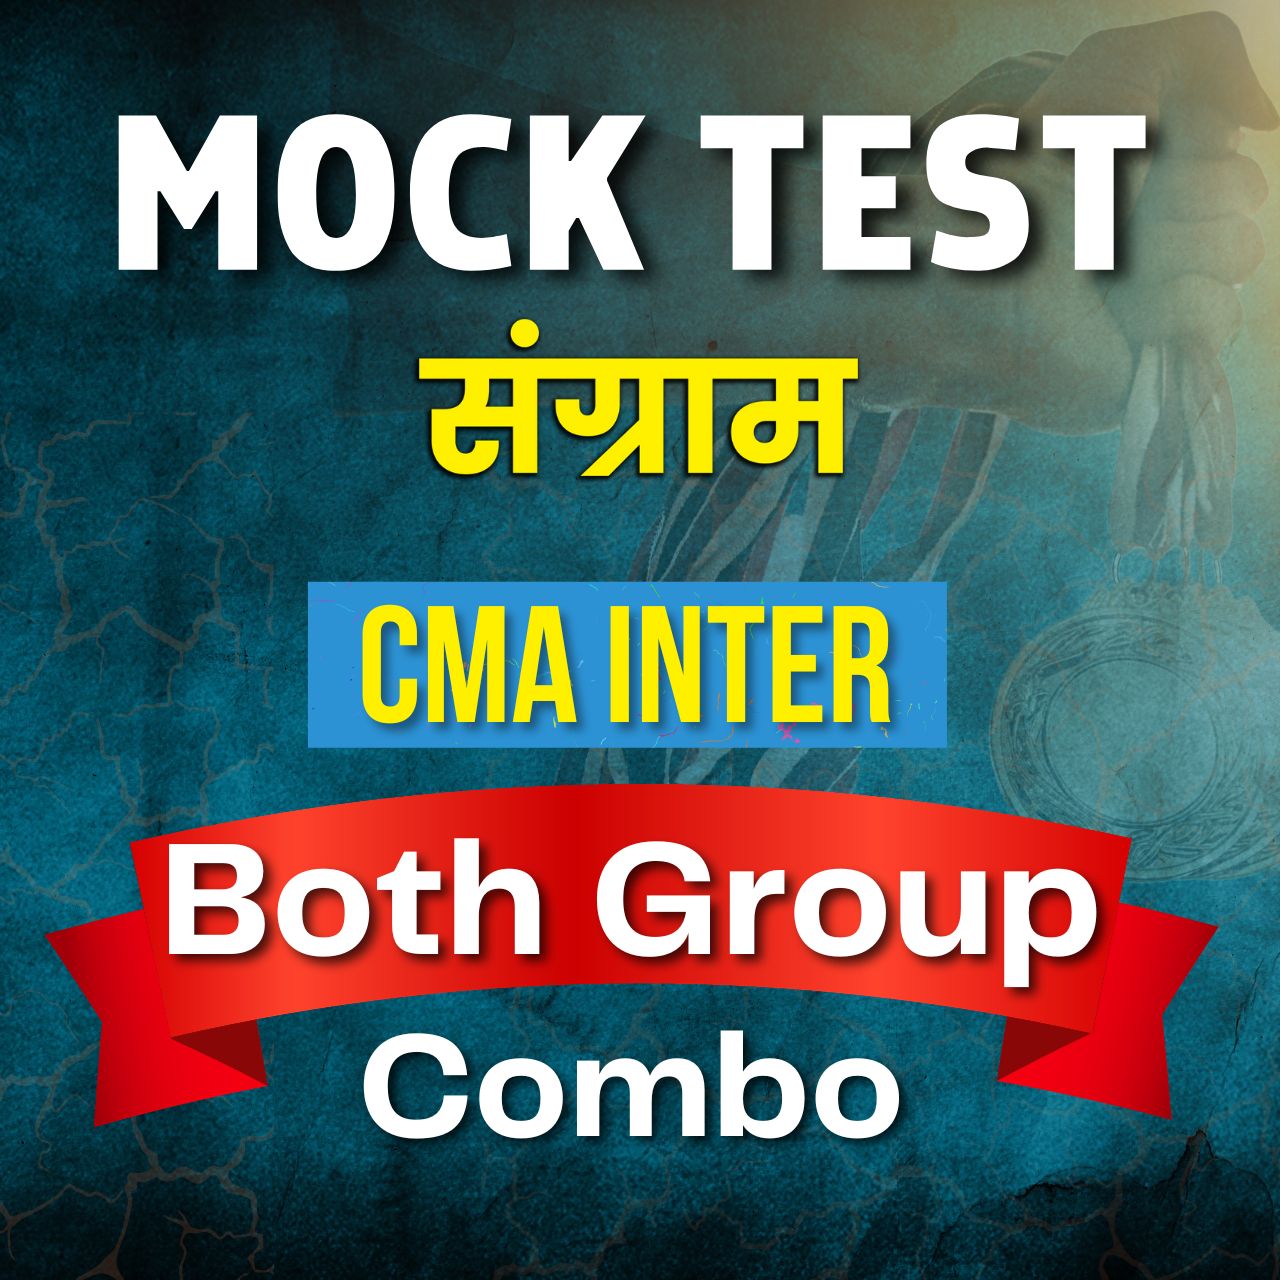 CMA Inter Both Group Combo (Paper 1 - 8) Mock Test